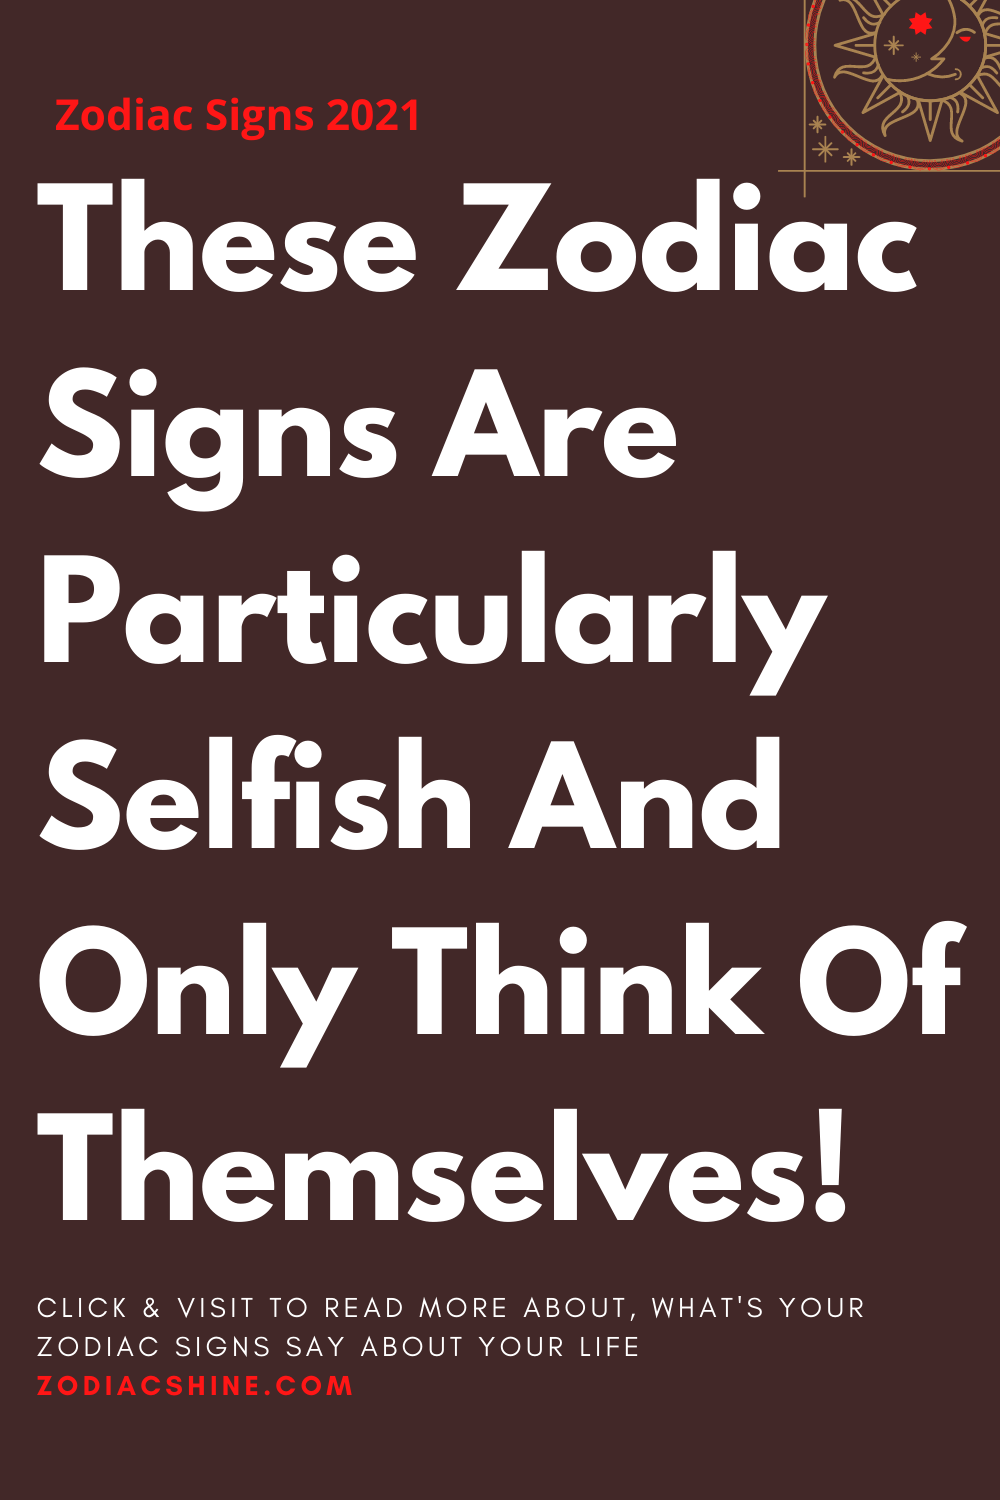 These Zodiac Signs Are Particularly Selfish And Only Think Of Themselves!